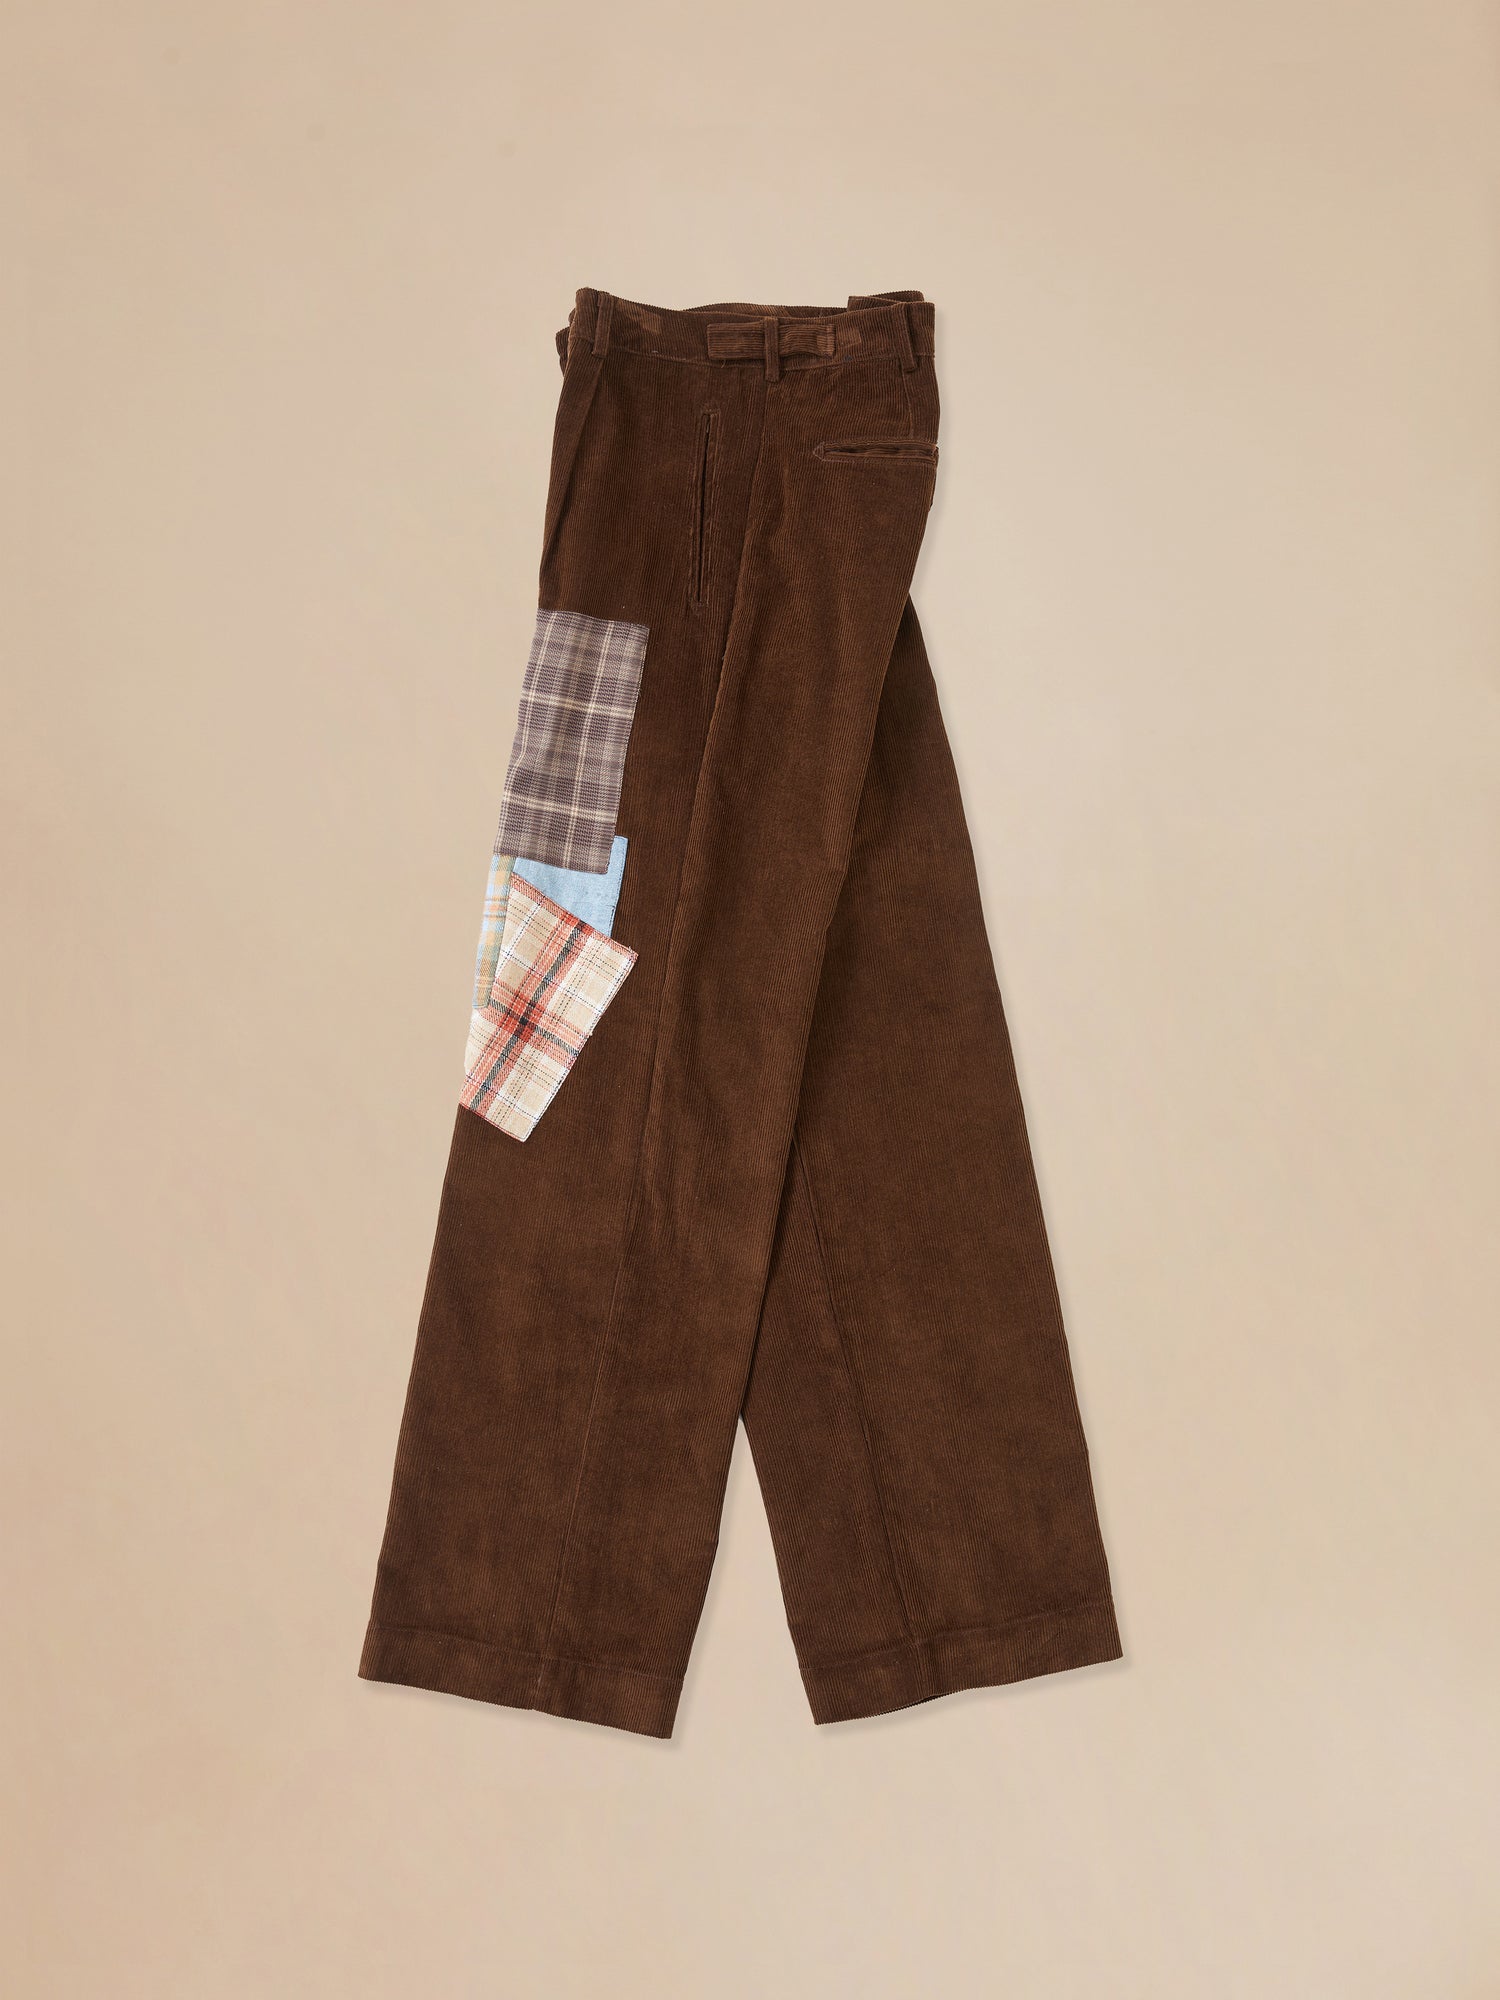 A pair of Multi-Plaid Patch corduroy pants from Found with fabric patches.